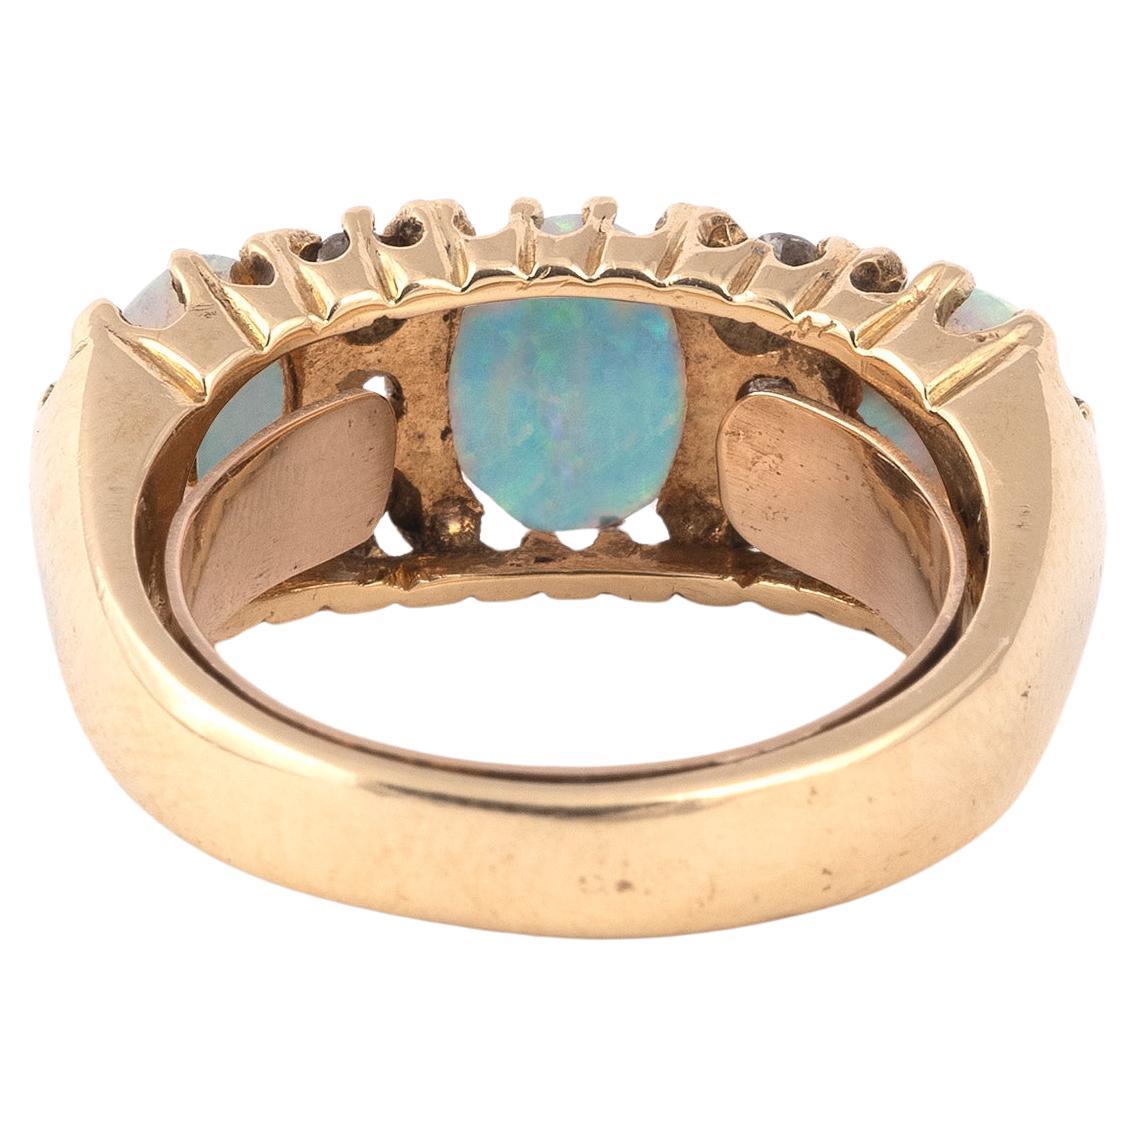 An Edwardian opal and diamond half hoop ring, set with three opal cabochons and six old circular-cut diamonds in yellow gold
Size 7 
Weight: 8,5gr.